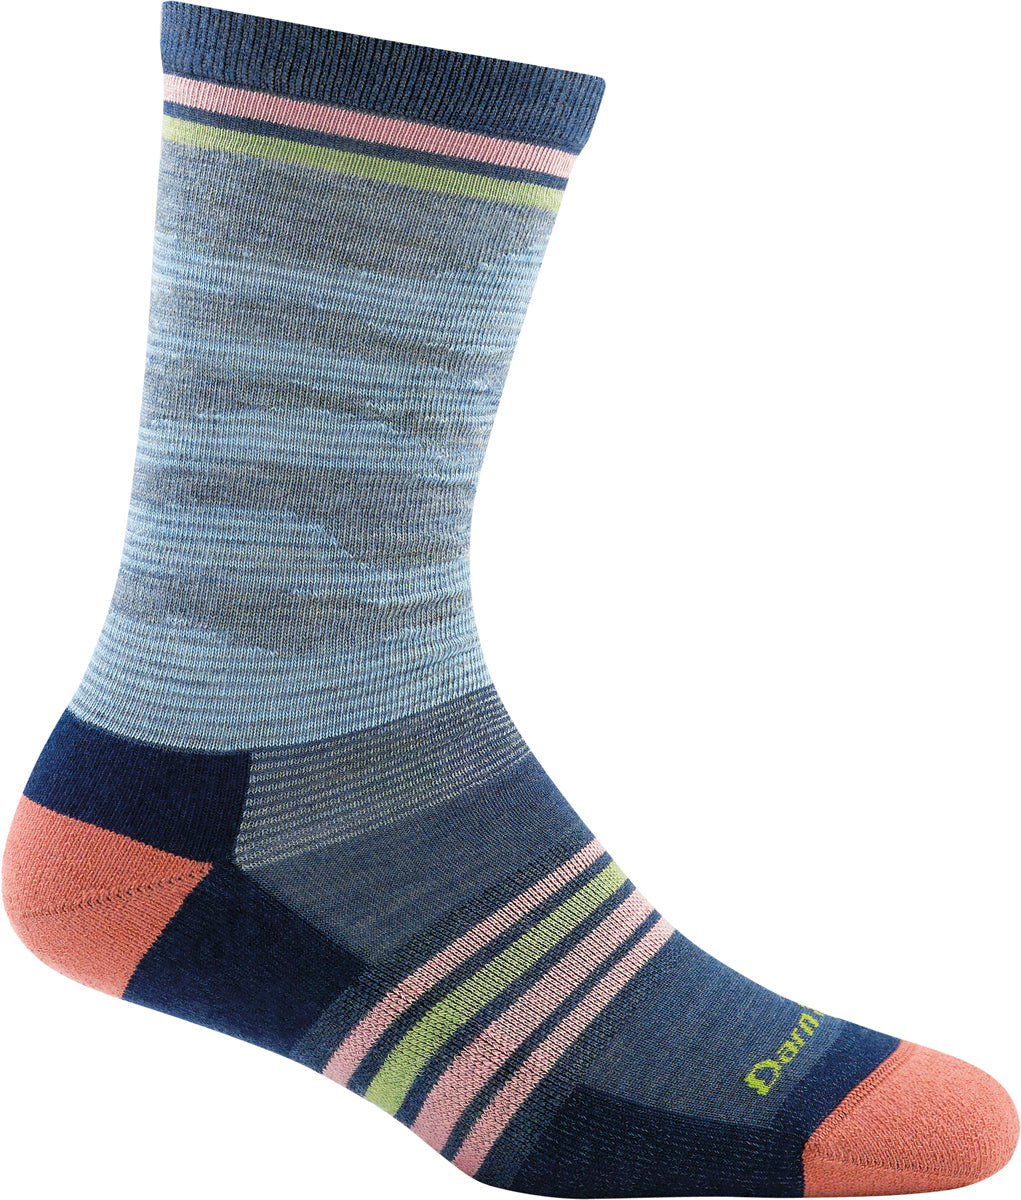 Women's Darn Tough Waves Crew Light Cushion Sock in Denim from the side view